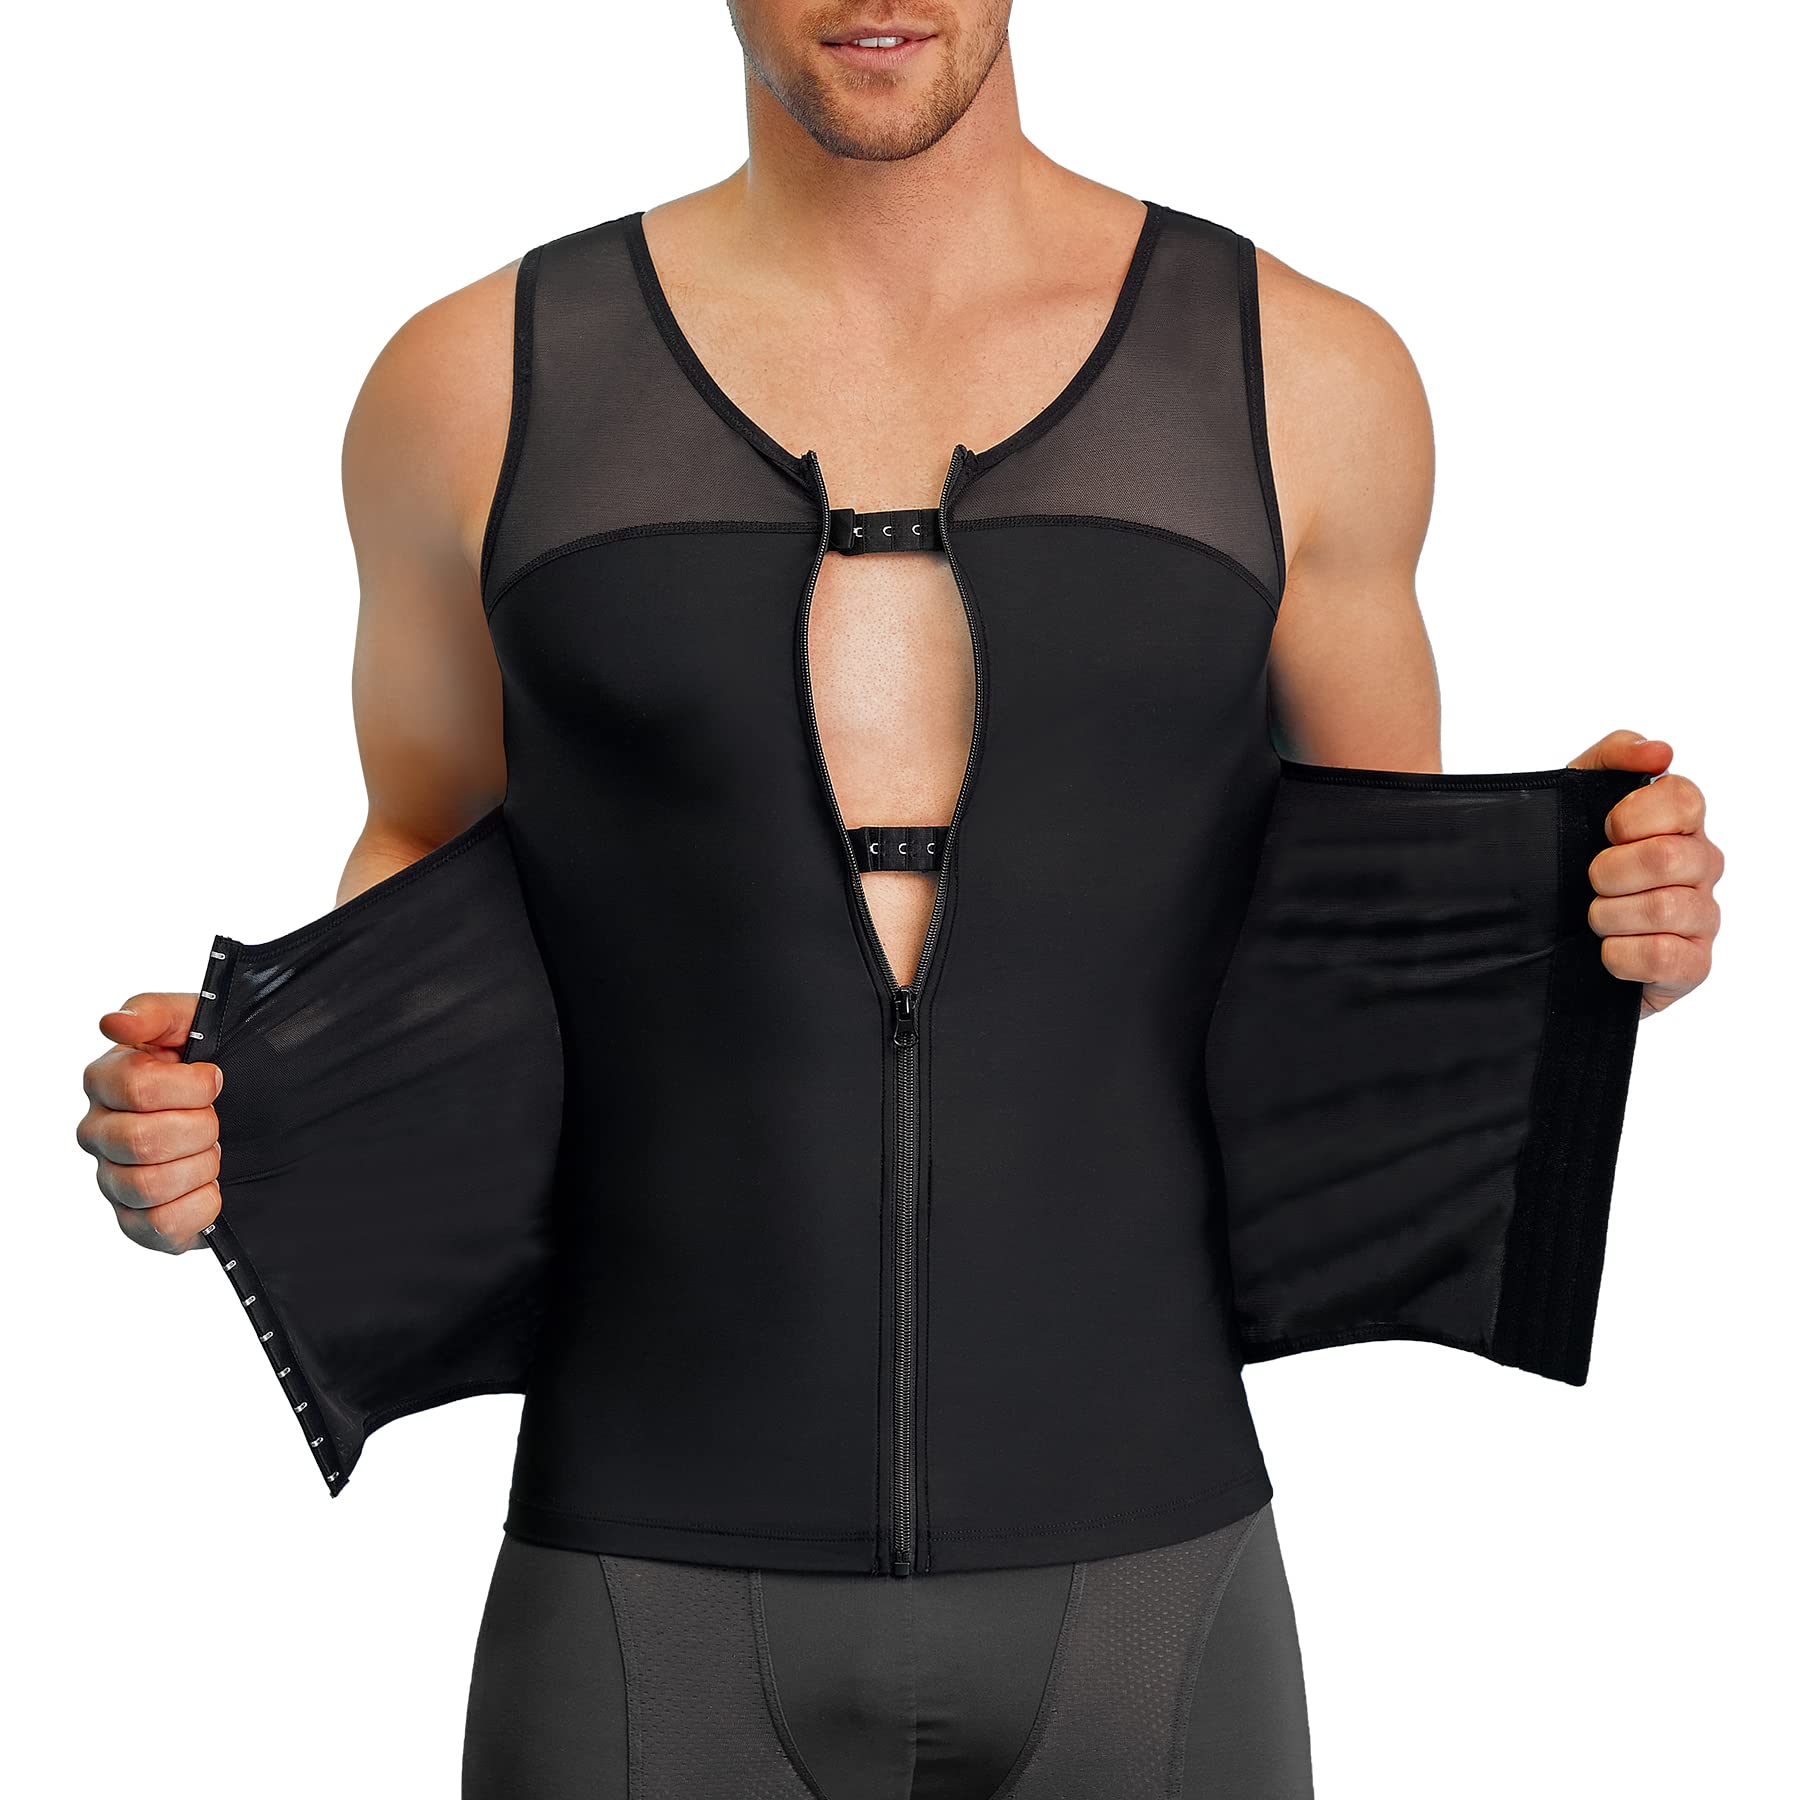  TAILONG Stretchrite Compression Shirt for Men Body